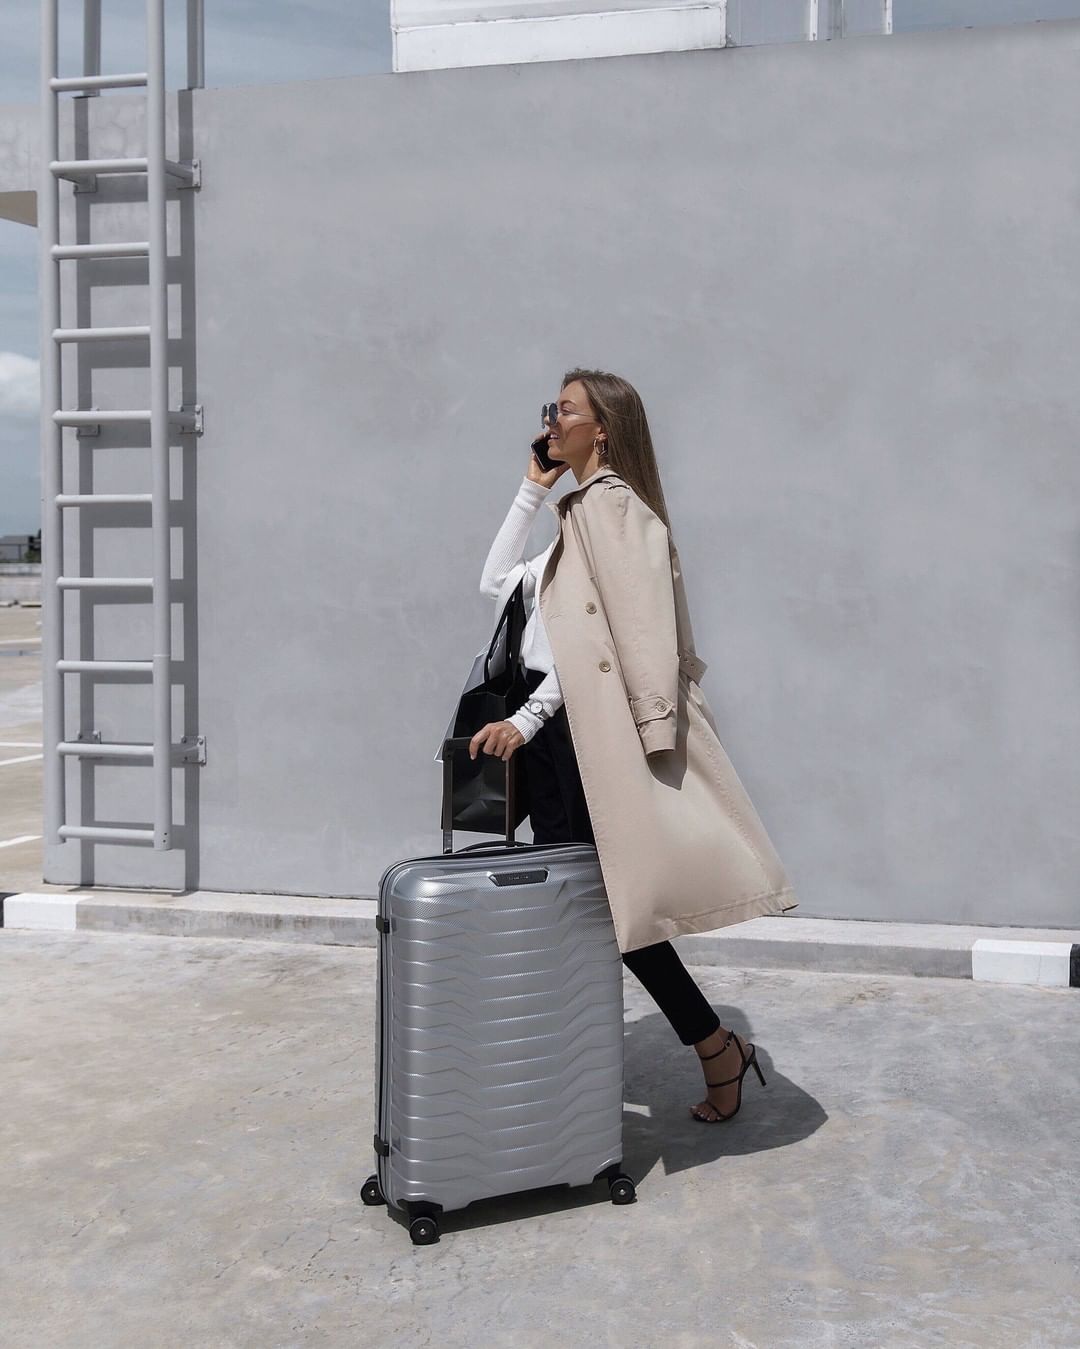 SAMSONITE - Get a good look at your new favourite suitcase, #Proxis. Discover the entire collection now on samsonite.com #MySamsonite #ExpectInnovation #NewIn——————————————————————— #travel #travelpho...